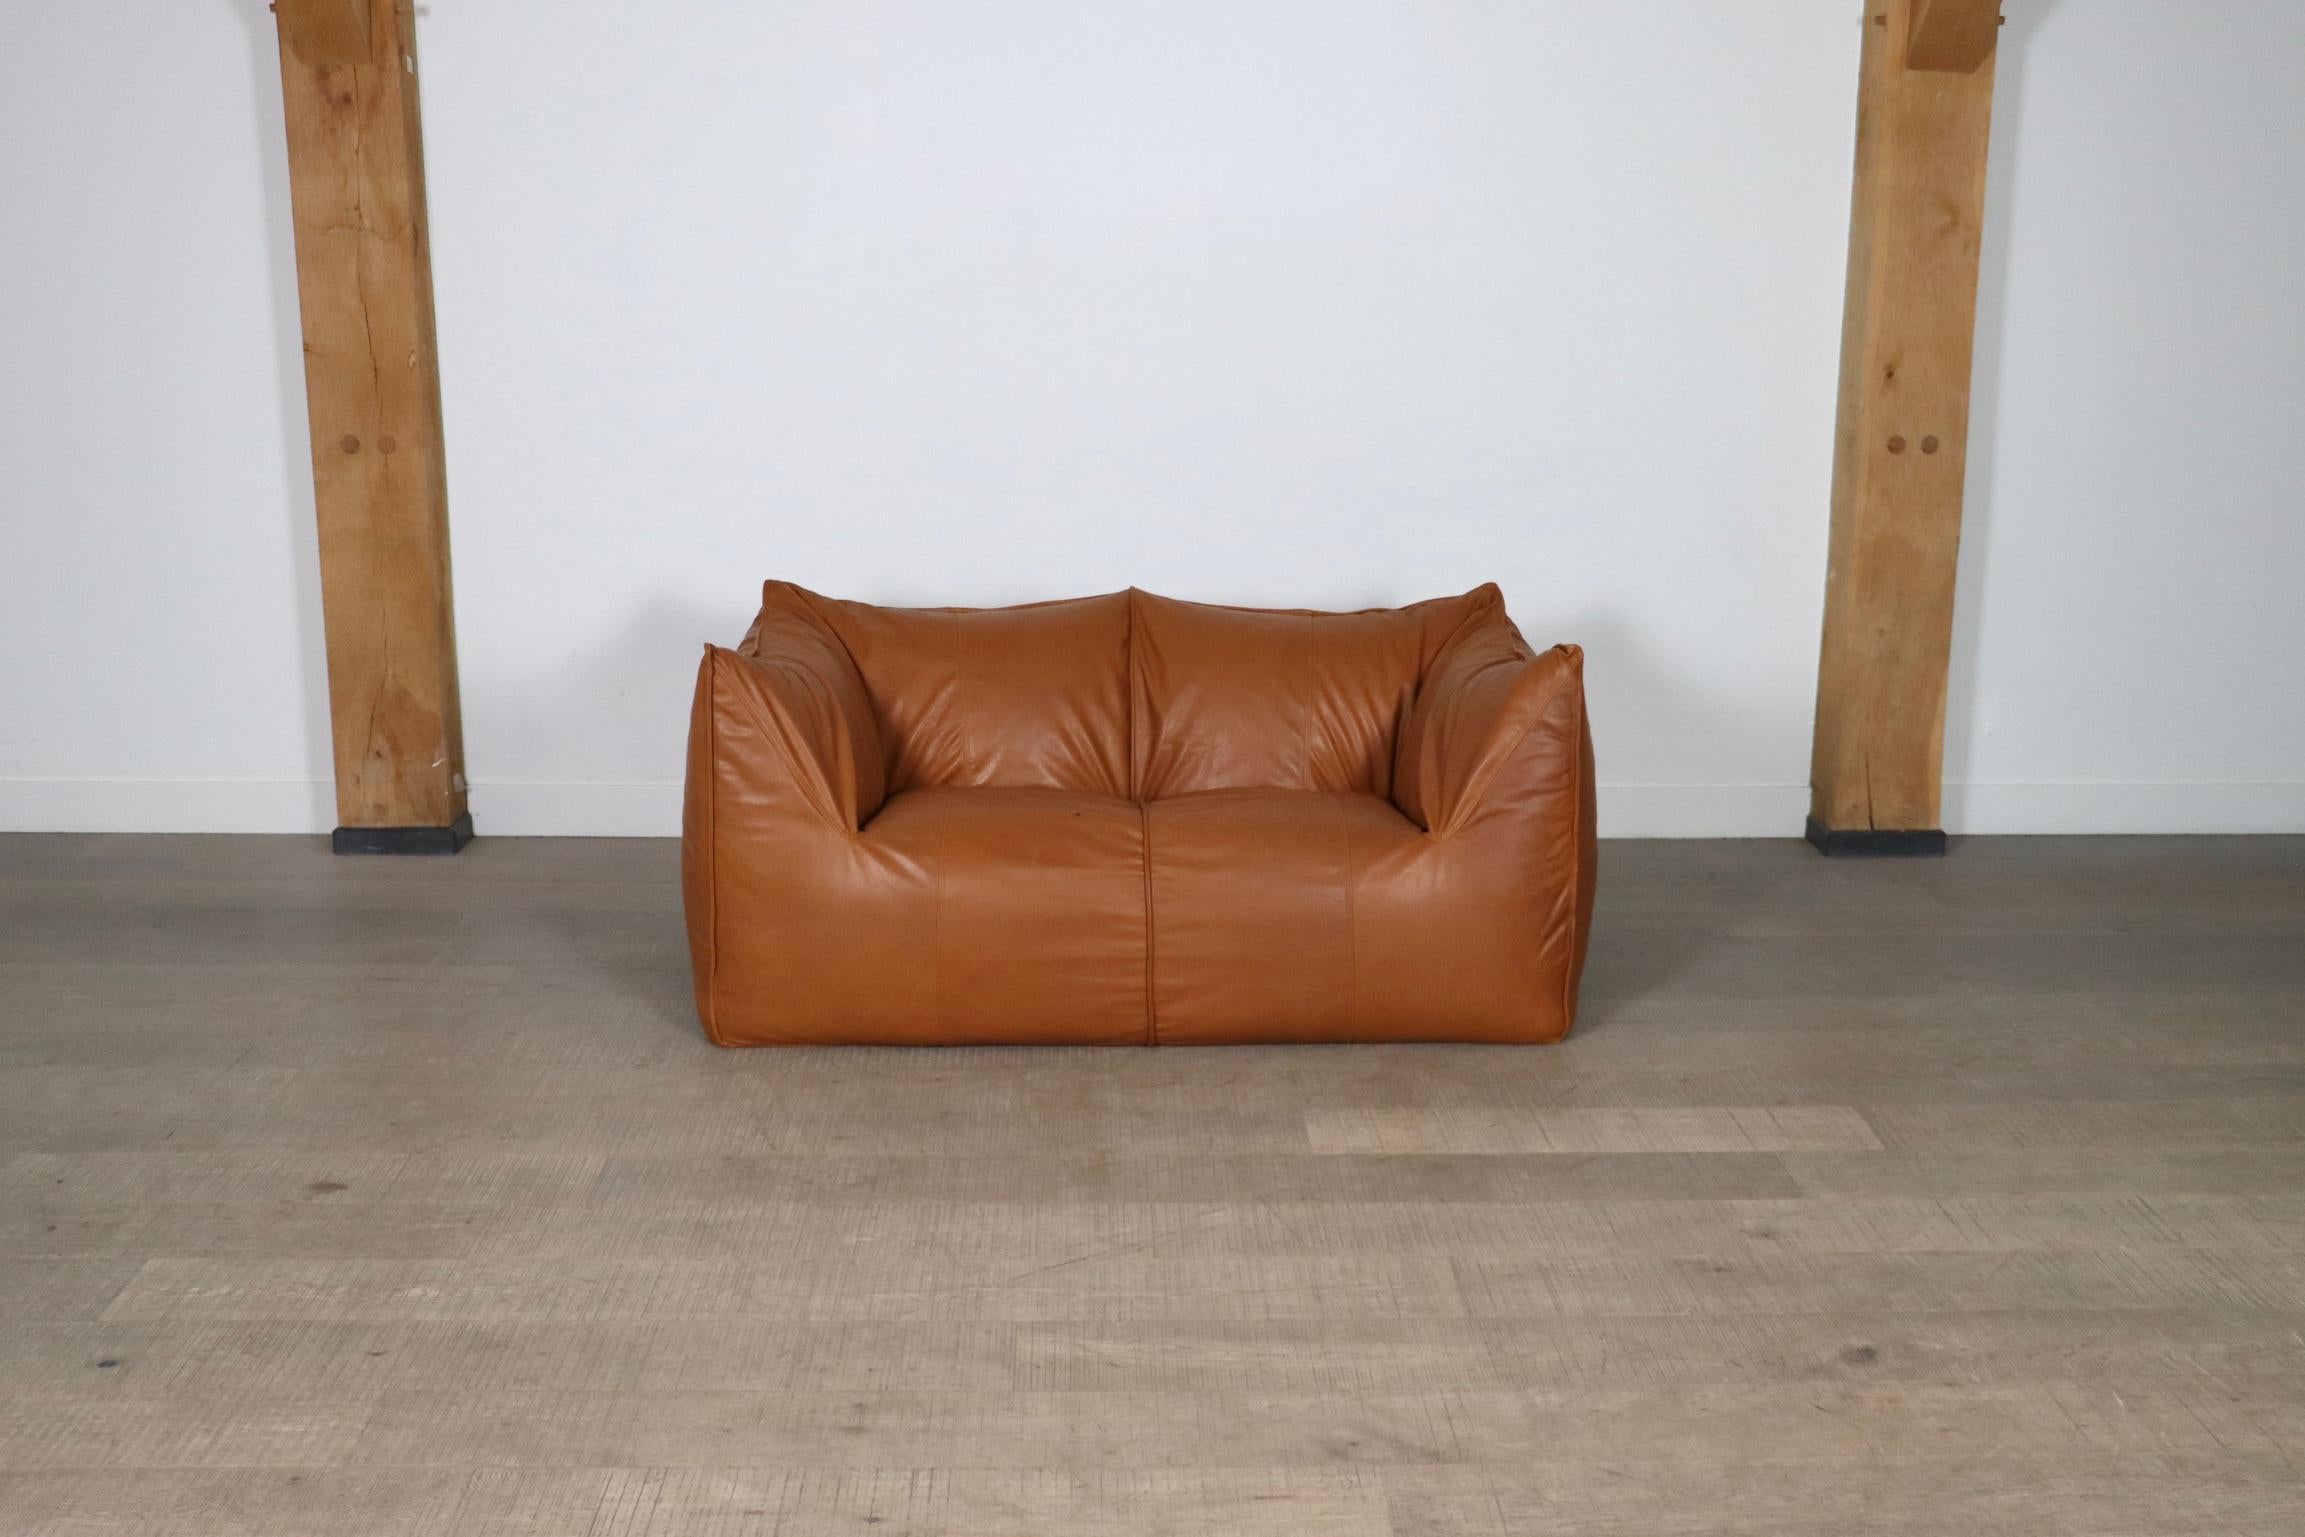 Stunning “Le Bambole” two seater sofa designed by Mario Bellini for B & B Italia in the 1970s. A beautiful edition in cognac leather. Besides the outstanding comfort this iconic sofa is famous for its timeless looks. The ‘Le Bambole’ collection was